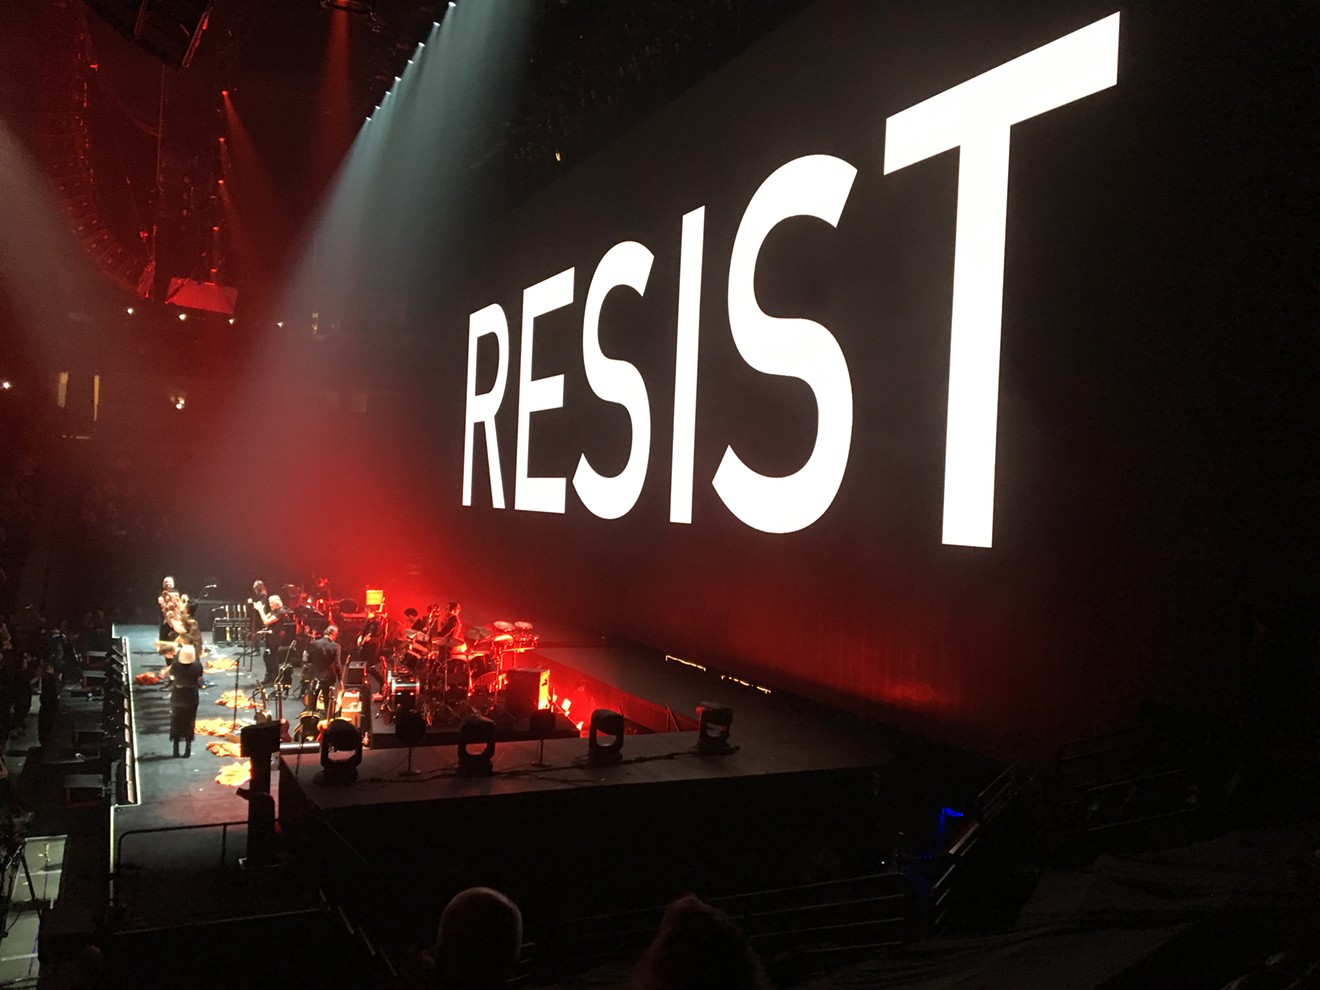 Roger Waters played Denver's Pepsi Center on Saturday, June 3. His concert had one message when it came to Donald Trump: "Resist."